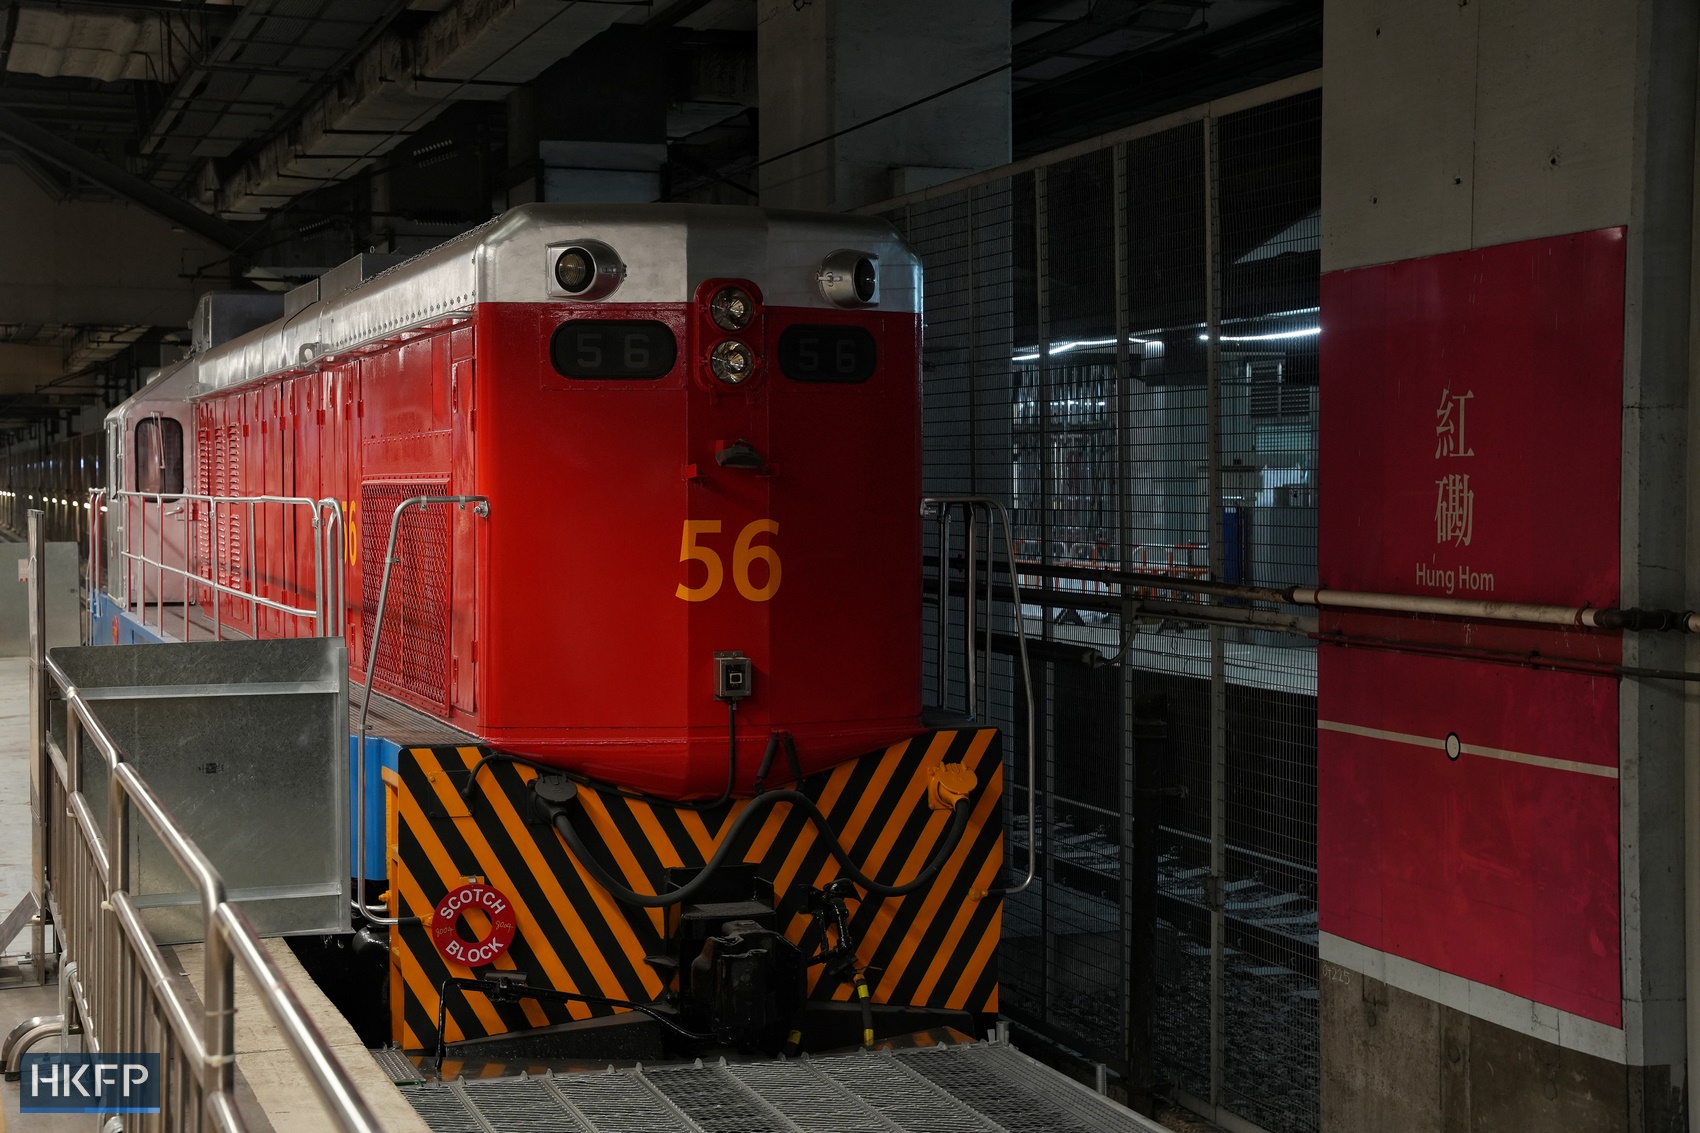 The diesel electric locomotive No. 56 “I. B. Trevor” is showcased at the “Station Rail Voyage” exhibition, presented by the MTR Corporation.